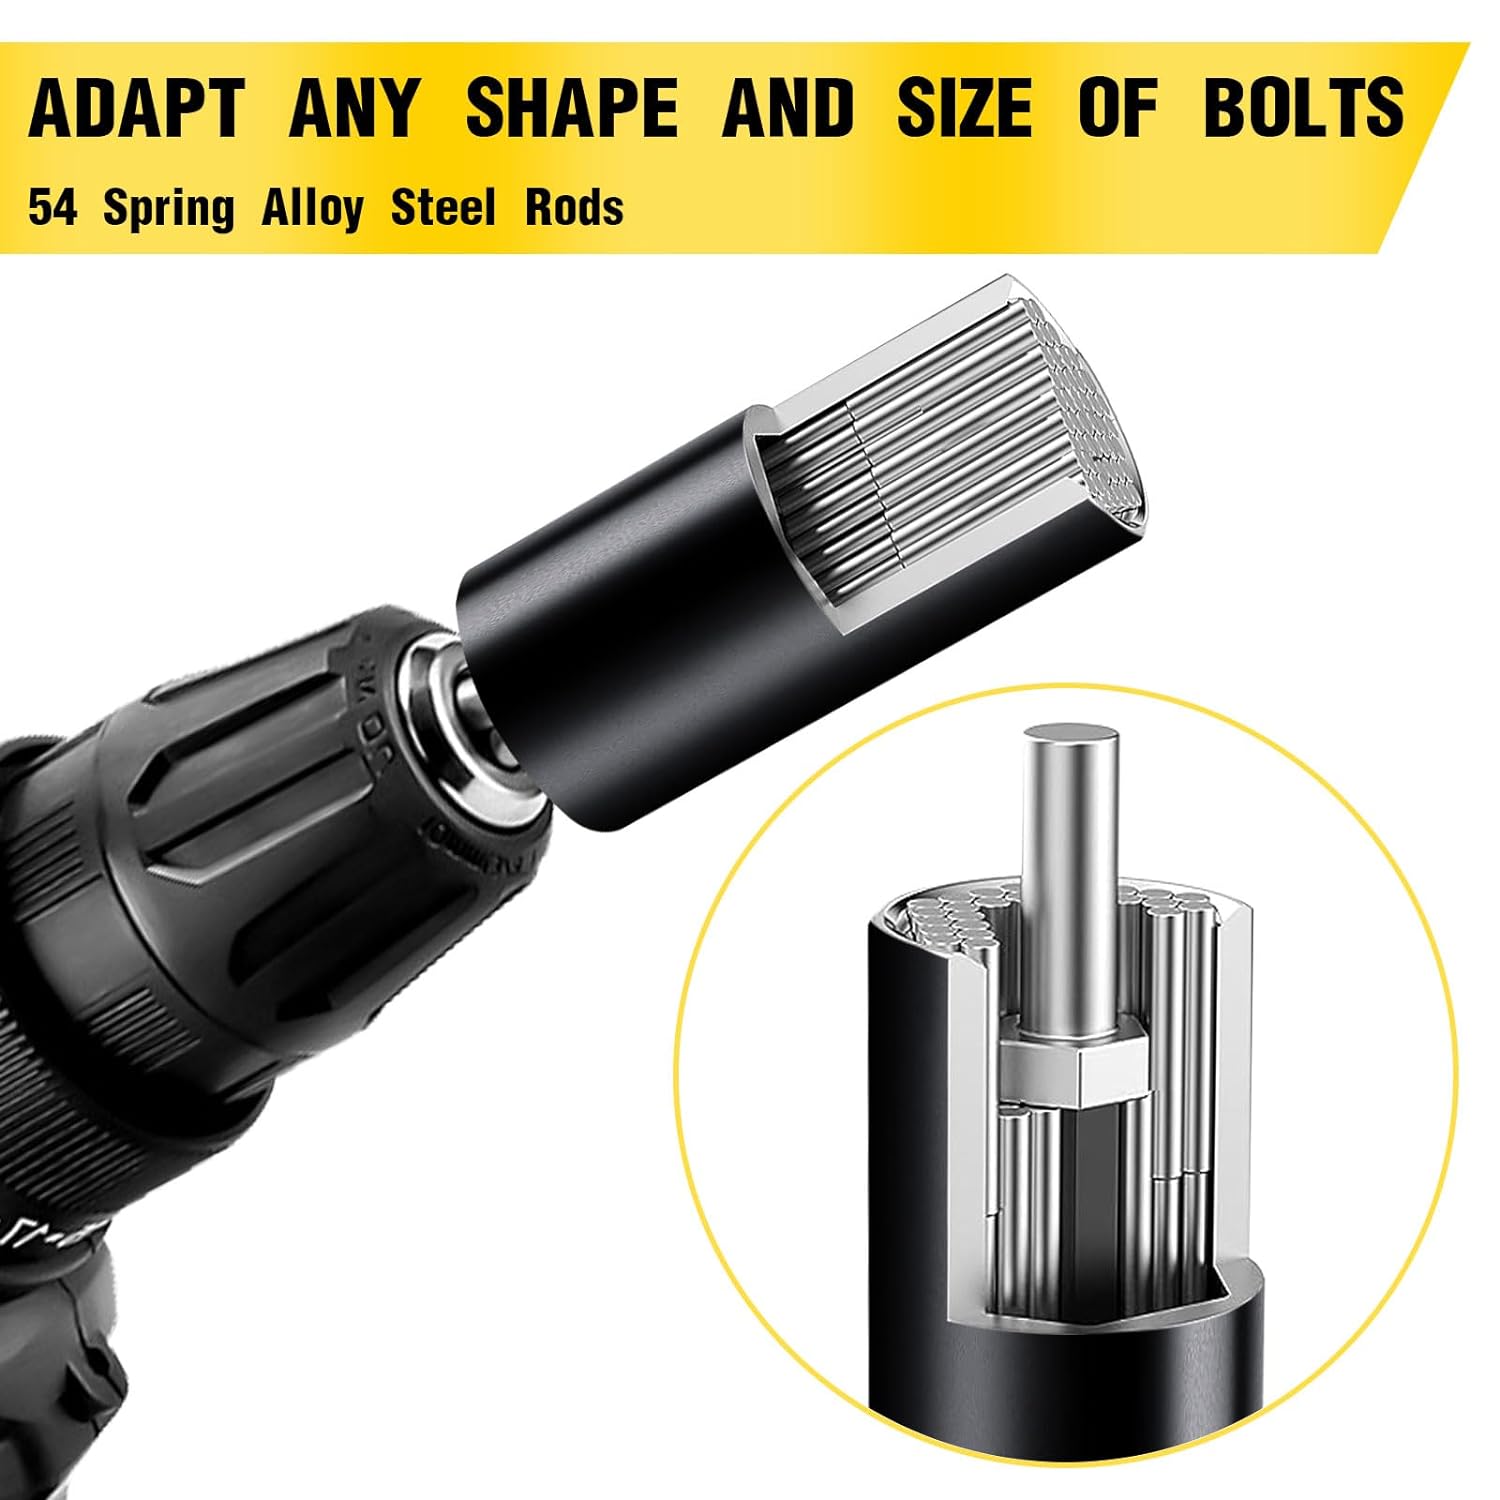 BOGRAND Universal Super Socket, Cool Gadgets Tools Gifts for Men Him Dad Boyfriend Husband and Handyman, Socket Set with Multifunction Adapter to Unscrew Any Bolt-Black